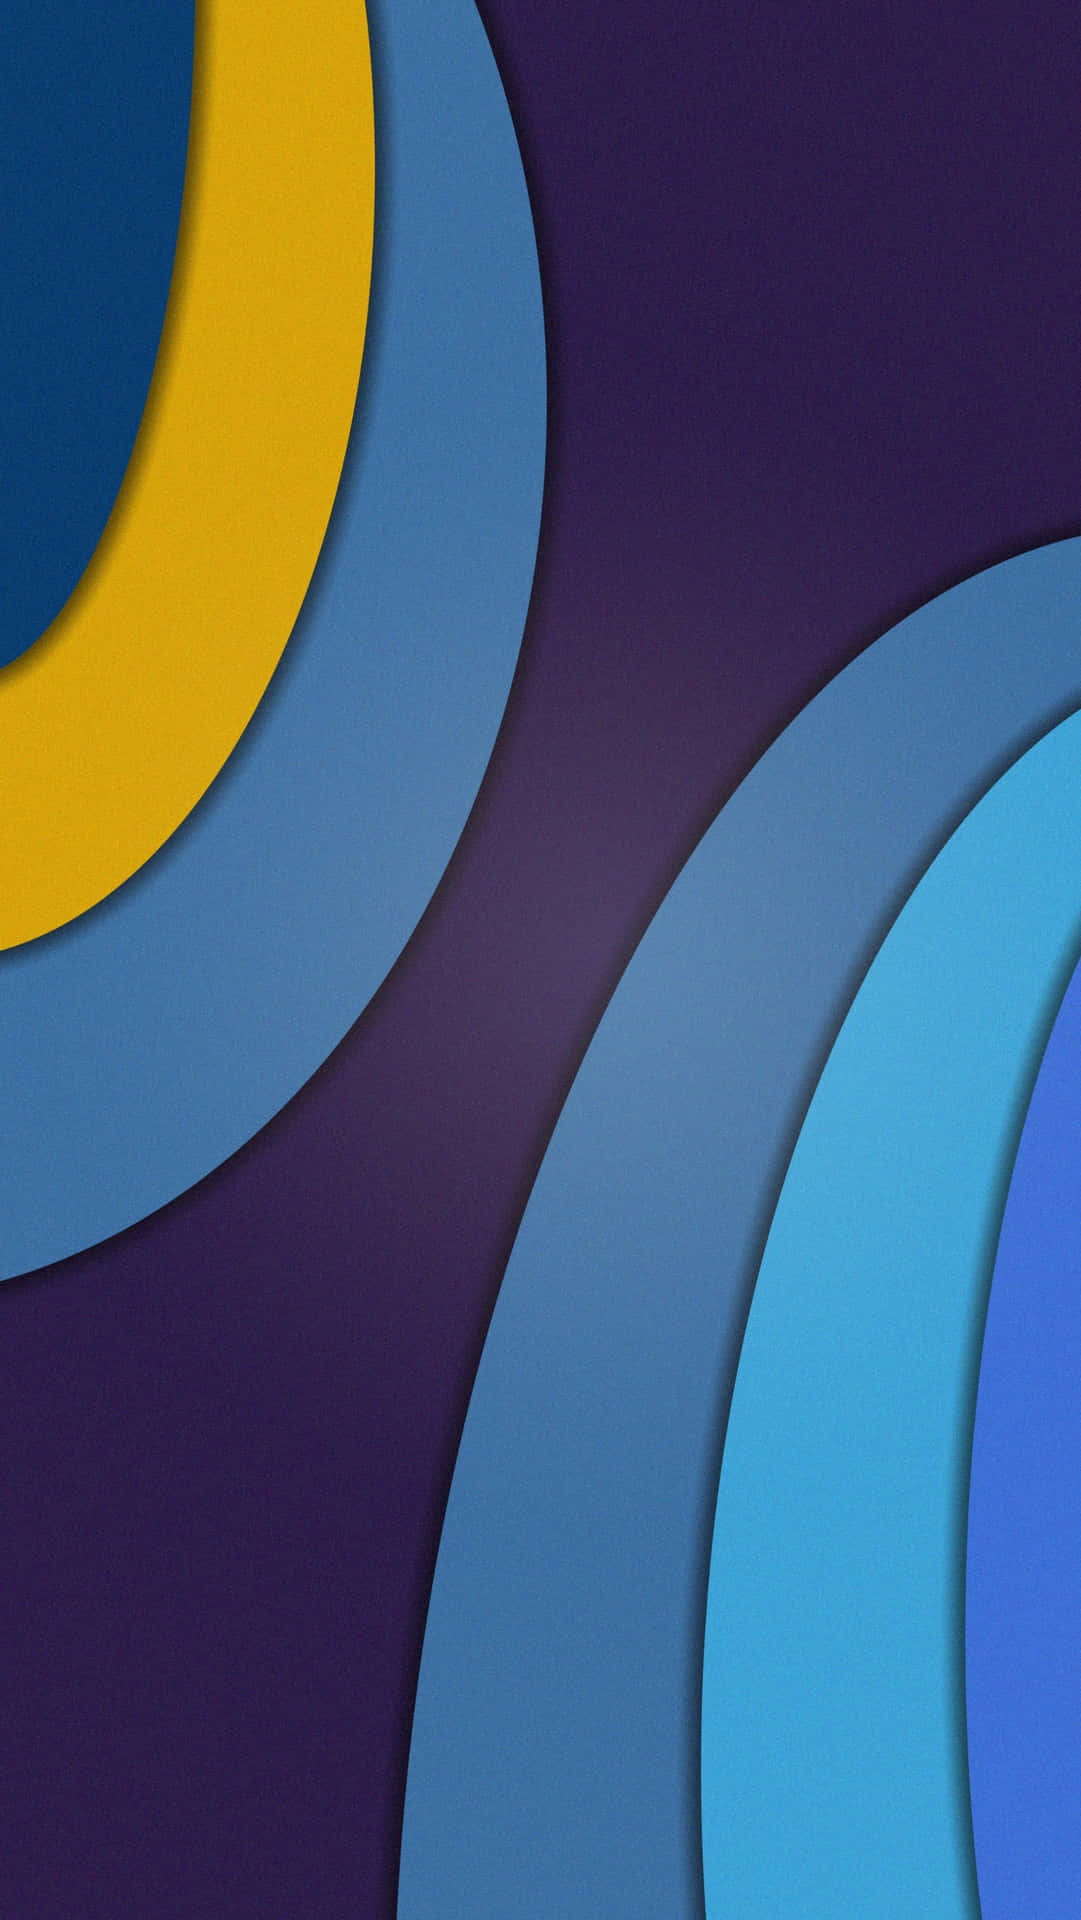 Download A Blue And Yellow Circle On A Purple Background | Wallpapers.com